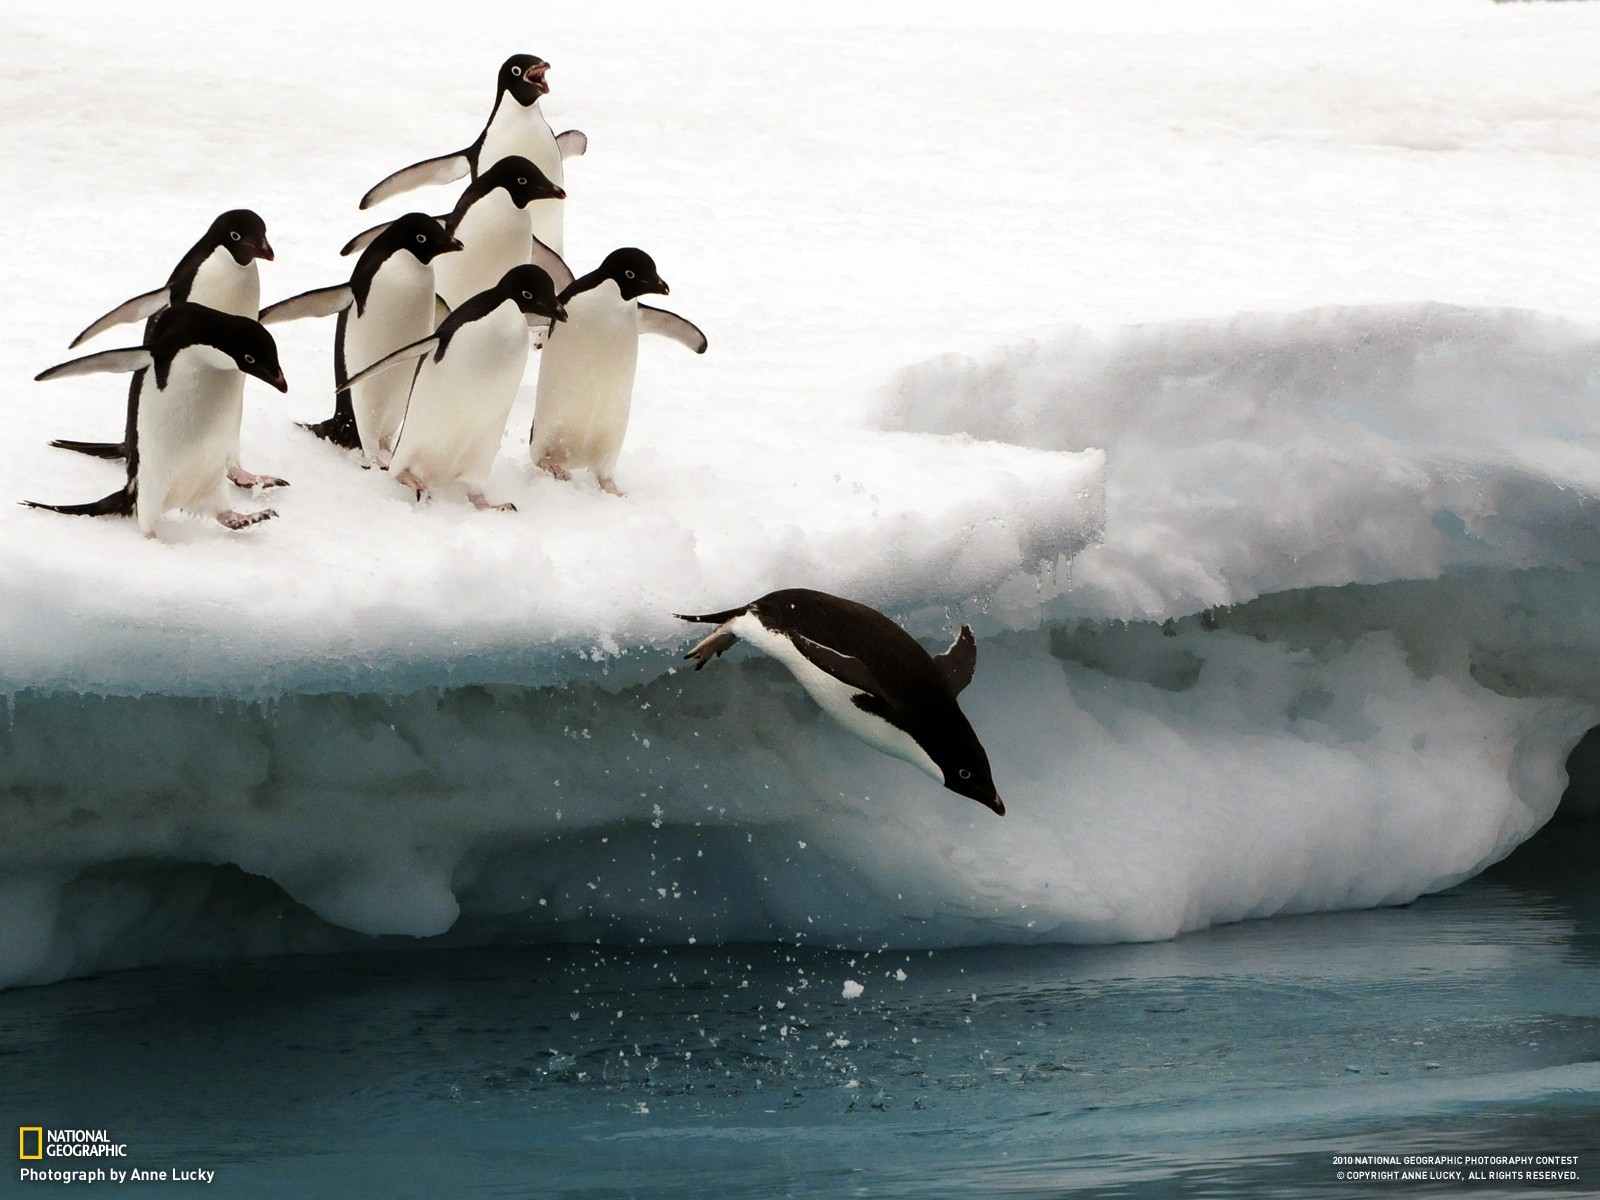 animals___under_water_penguins_from_ice_floe_to_jump_into_the_water_043662_.jpg